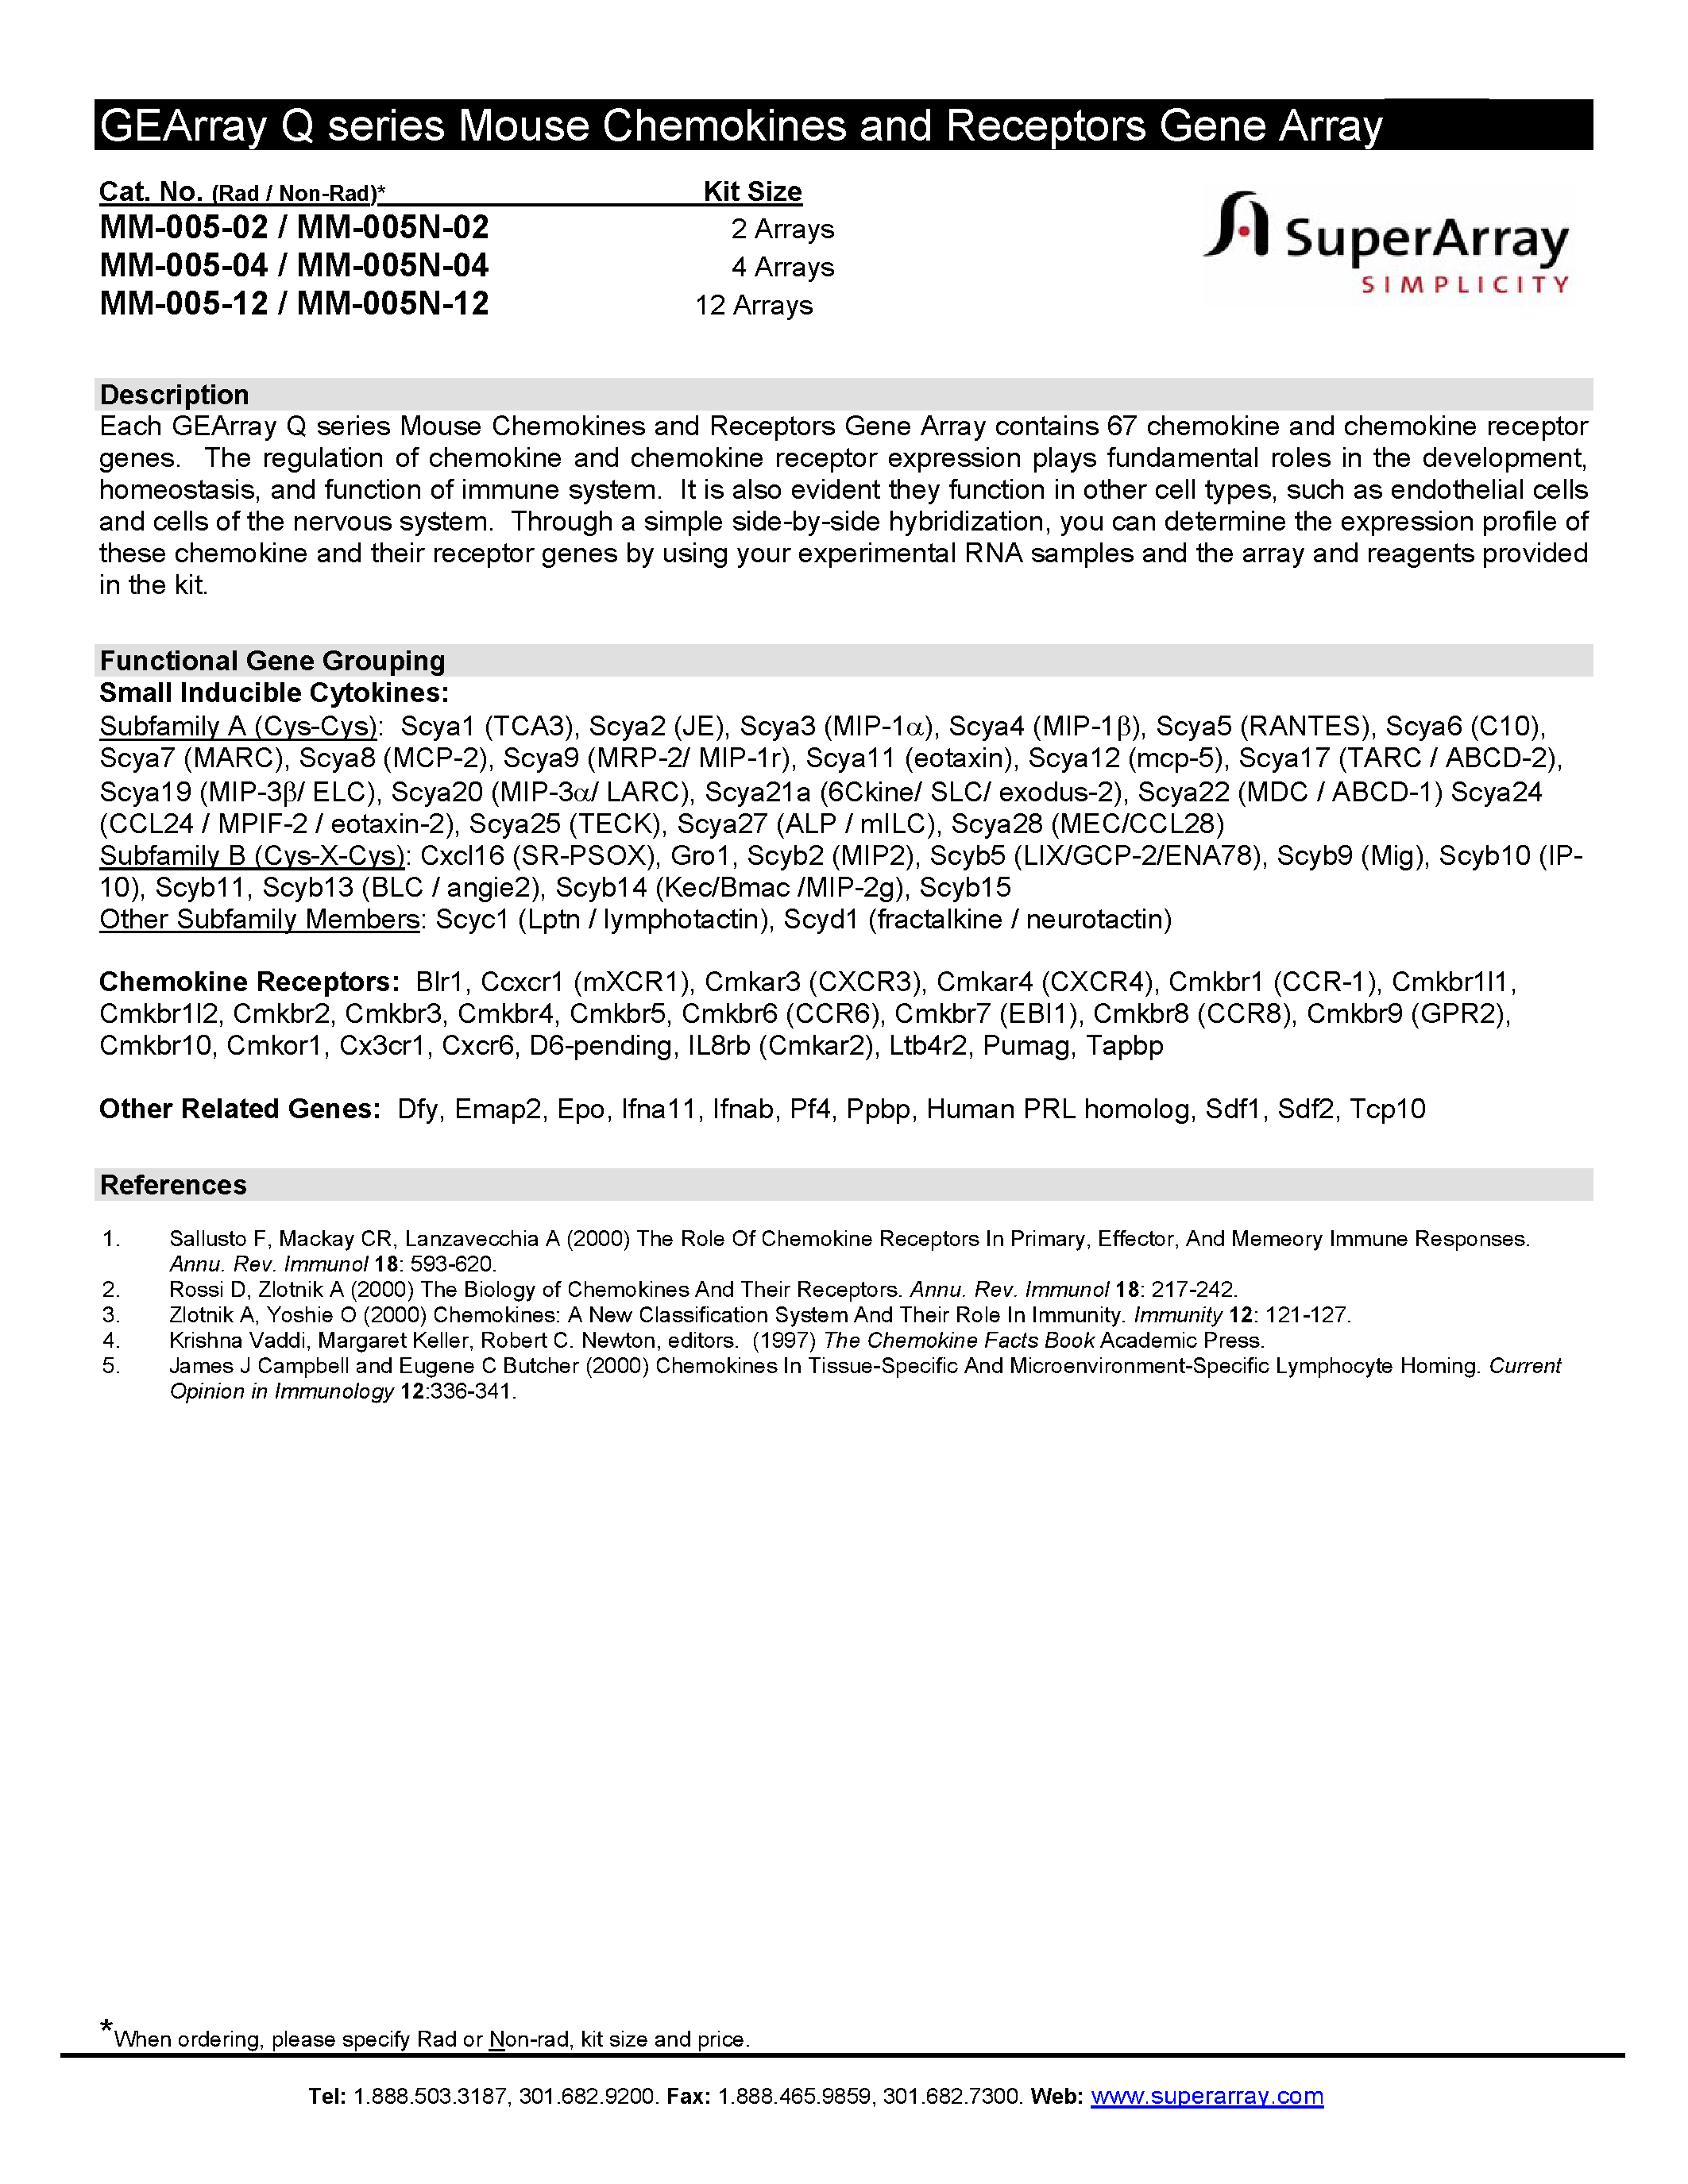 Datasheet MM-005-02 - GEArray Q series Mouse Chemokines and Receptors Gene Array page 1